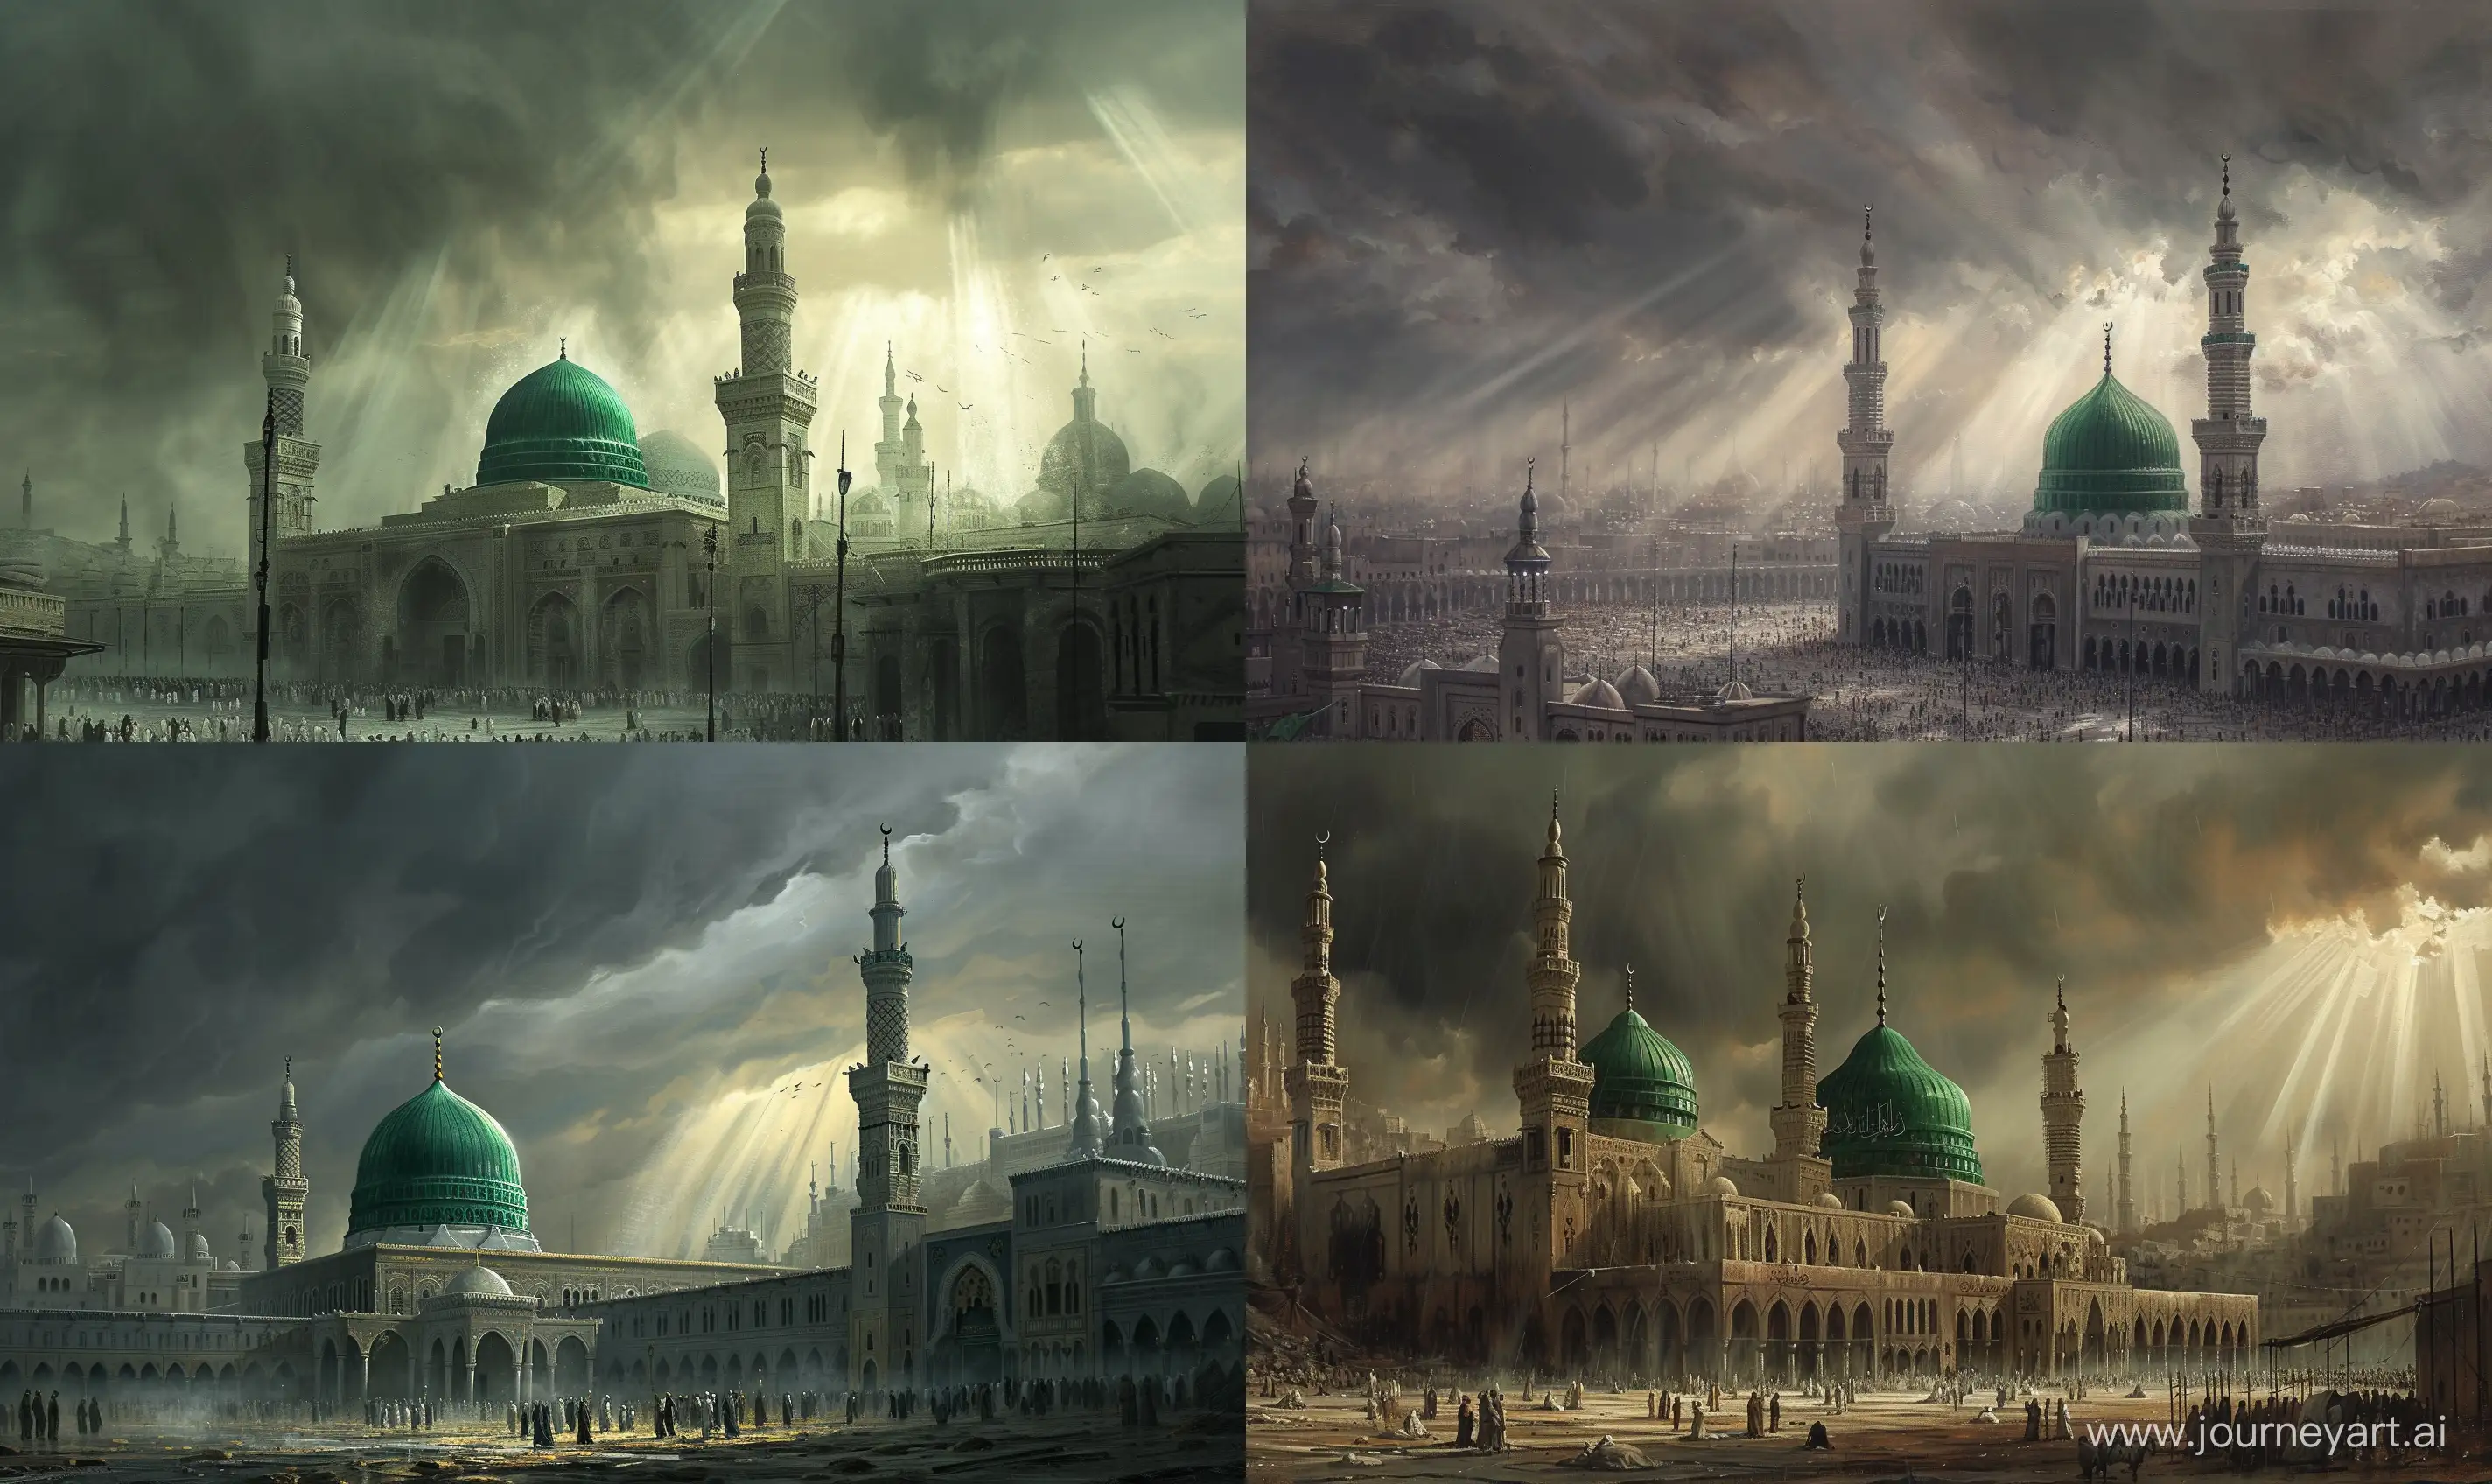 medieval Renaissance painting in Sandro Botticelli style, depicting the Grand mosque of Medina with a Green dome of masjid nabawi, medieval era, few sun rays coming out from the cloudy sky, dark grey weather, pilgrims, calm environment --ar 5:3 --v 6